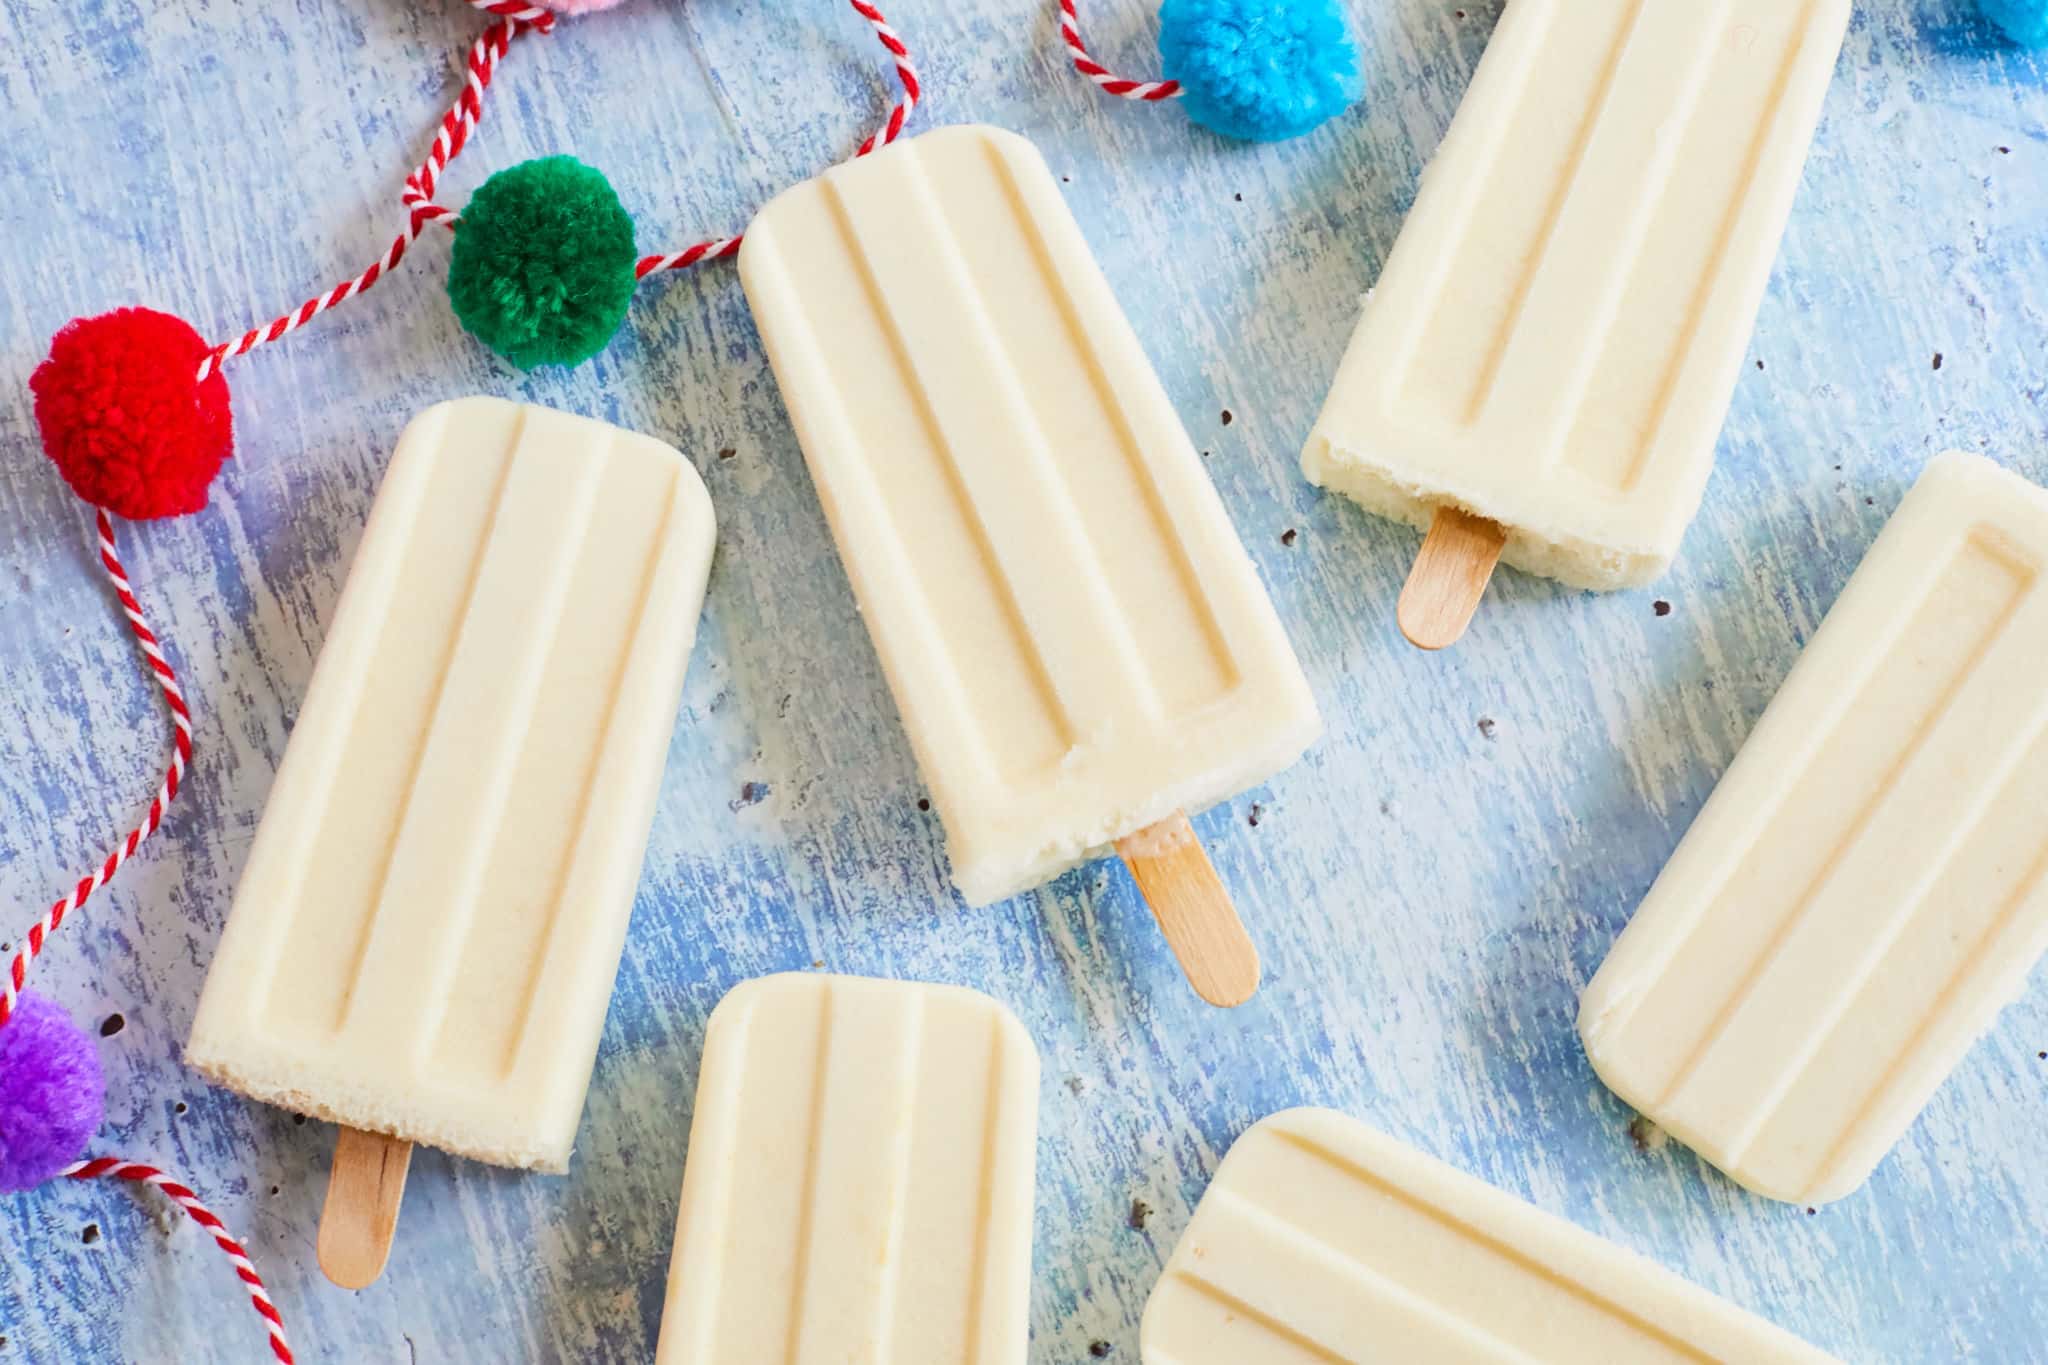 Piña colada popsicles laying flat on a table.